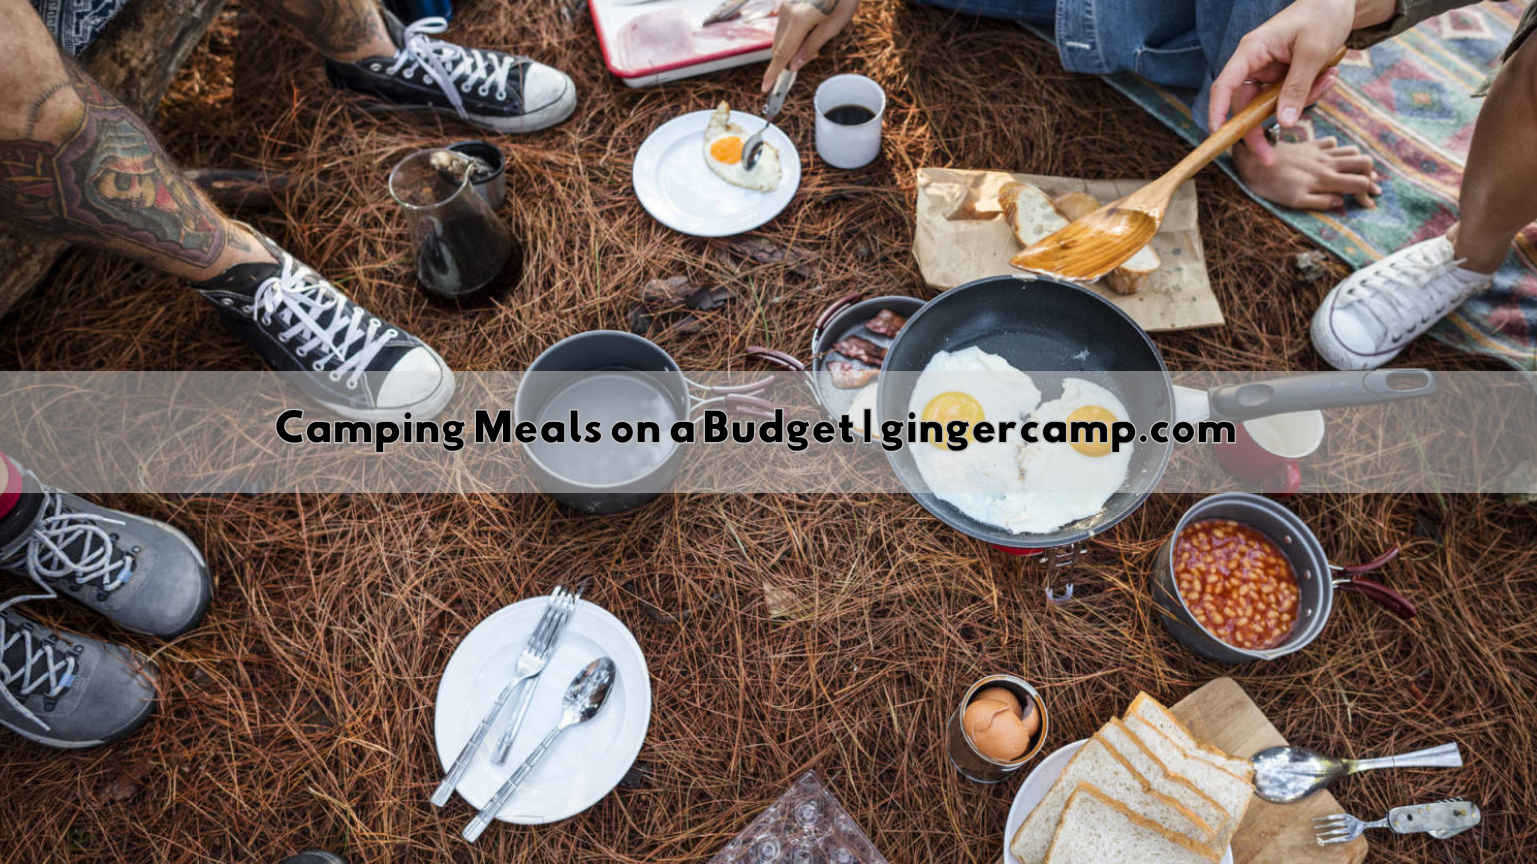 Camping Meals on a Budget